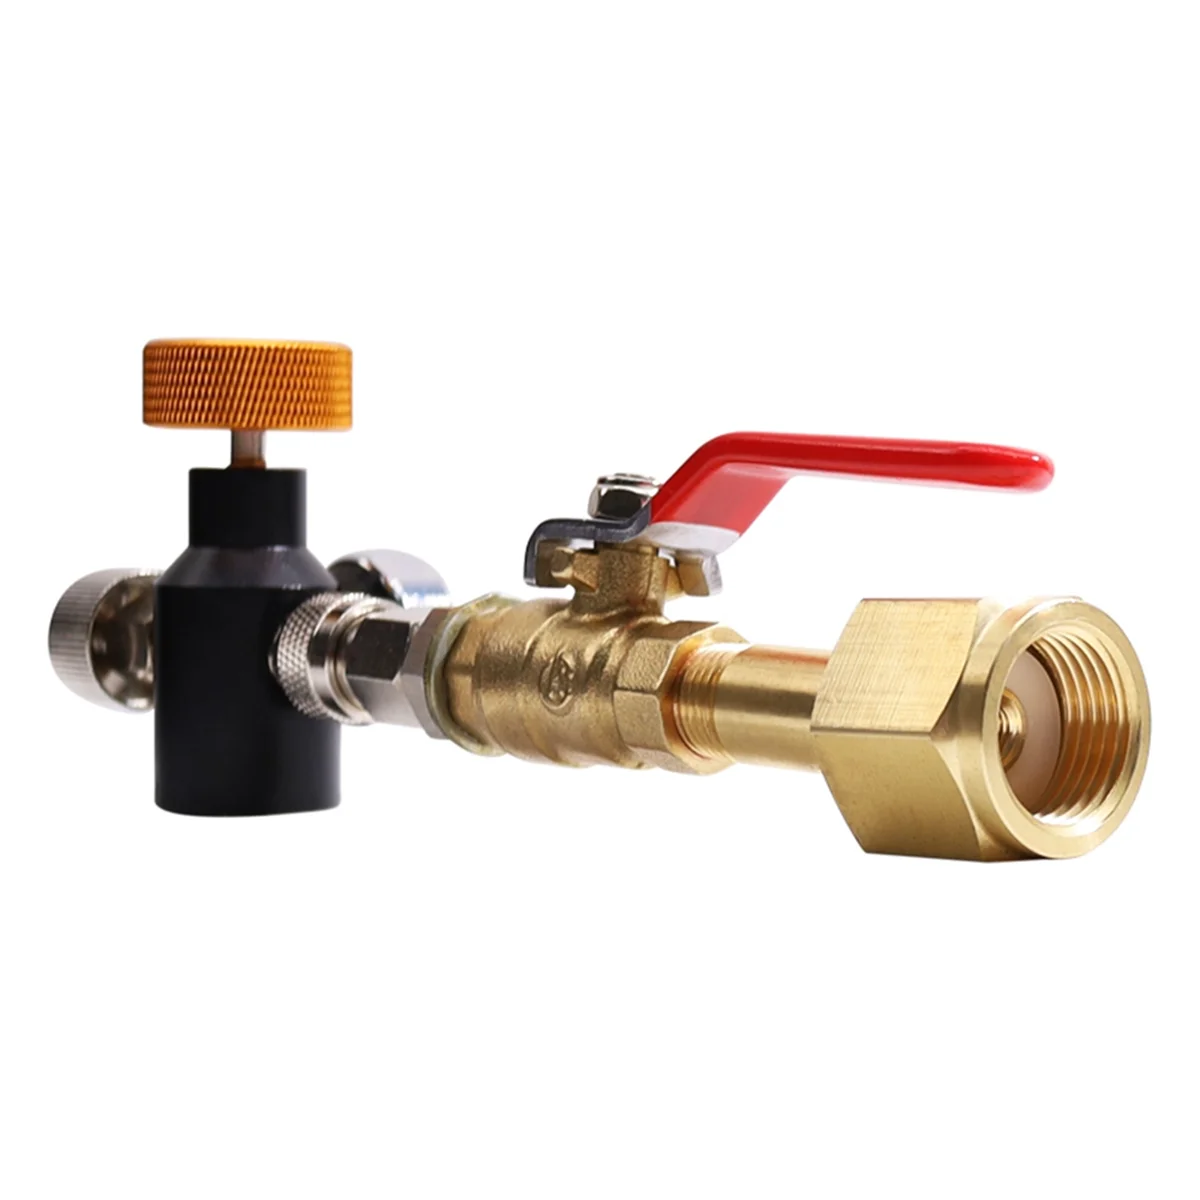 

Soda Co2 Cylinder Tank Refill Adapter Recharge Filling Station with Ball Valve Replacement for W21.8-14 DIN477 to TR21-4